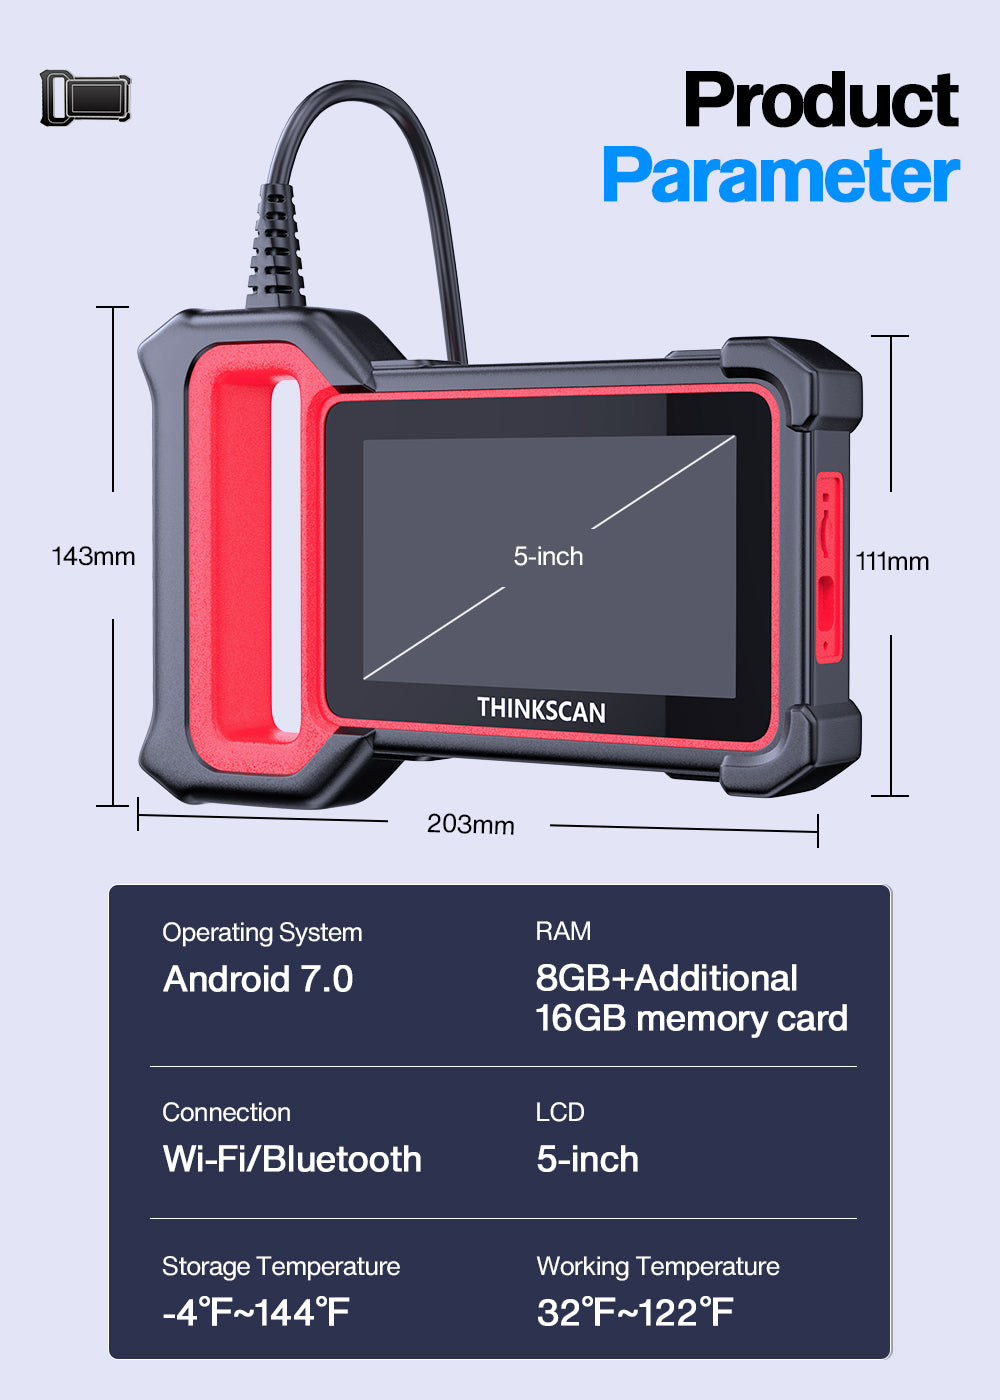 THINKCAR ThinkScan Plus S4 Parameter and More Details